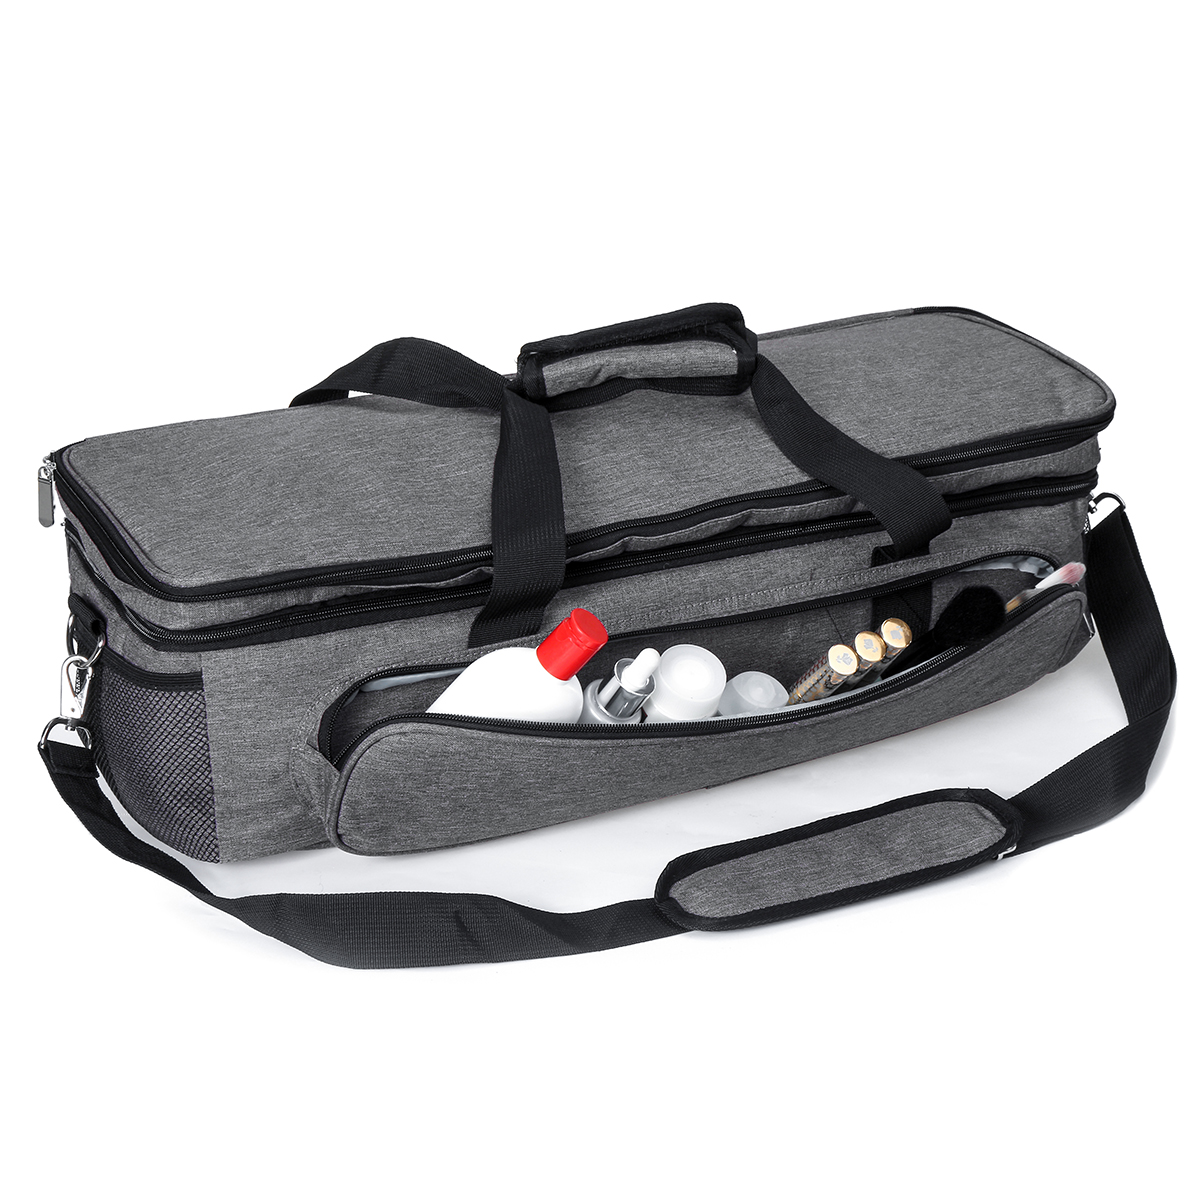 Portable-600D-Oxford-Cloth-Cutting-Machine-Carrying-Storage-Bag-Tool-Travel-Case-1618038-6